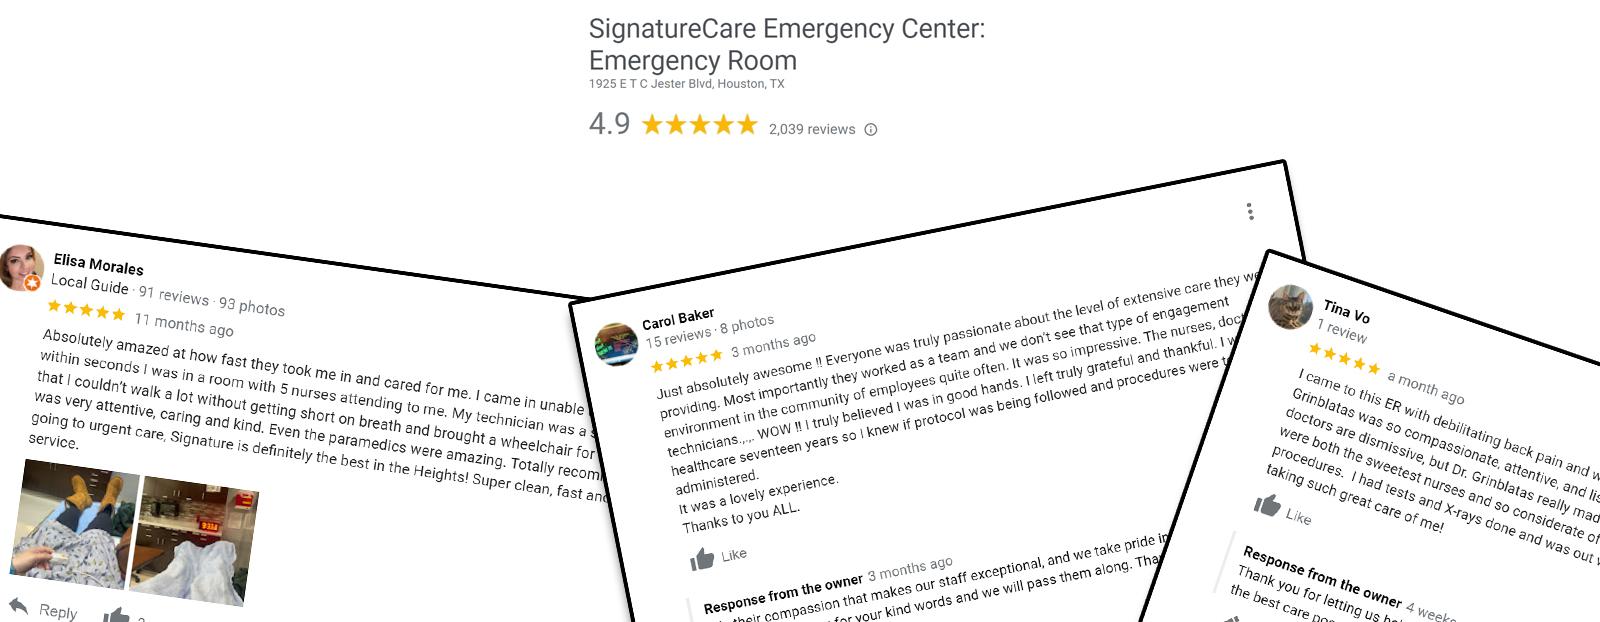 Top Rated Emergency Room on Google